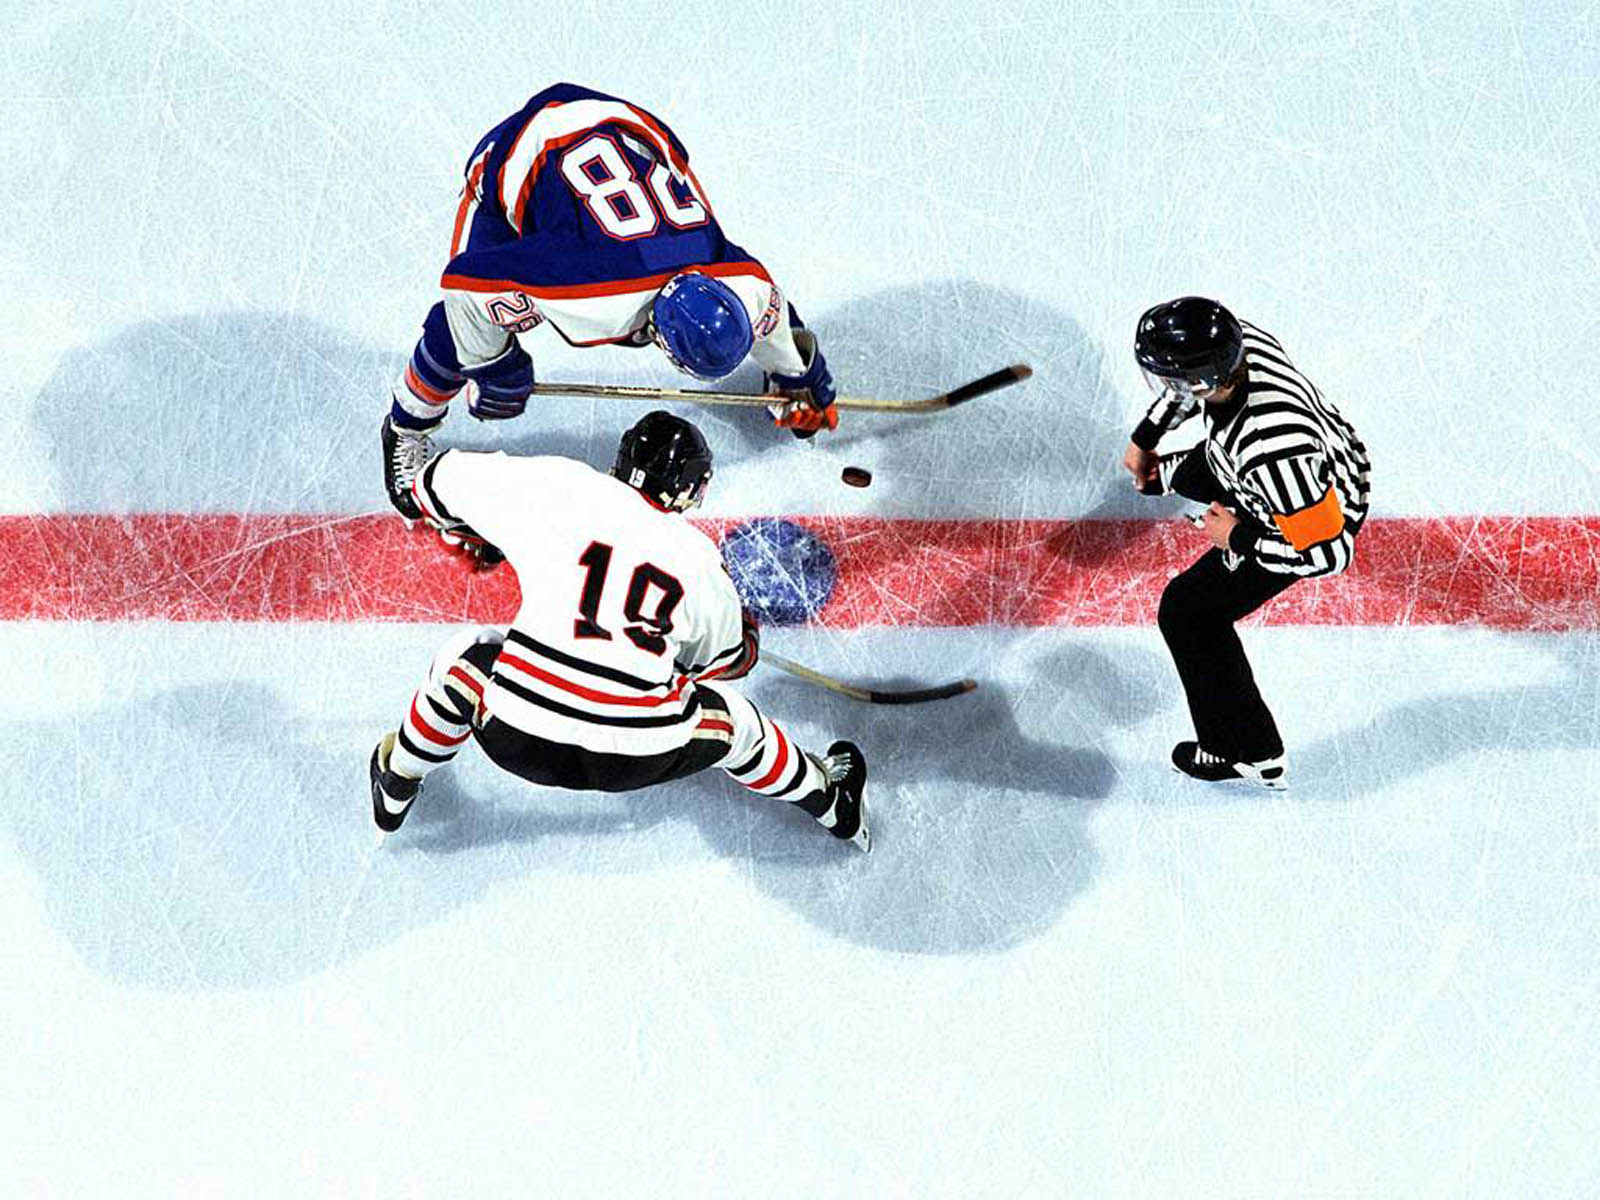 Hockey Background Wallpapers.